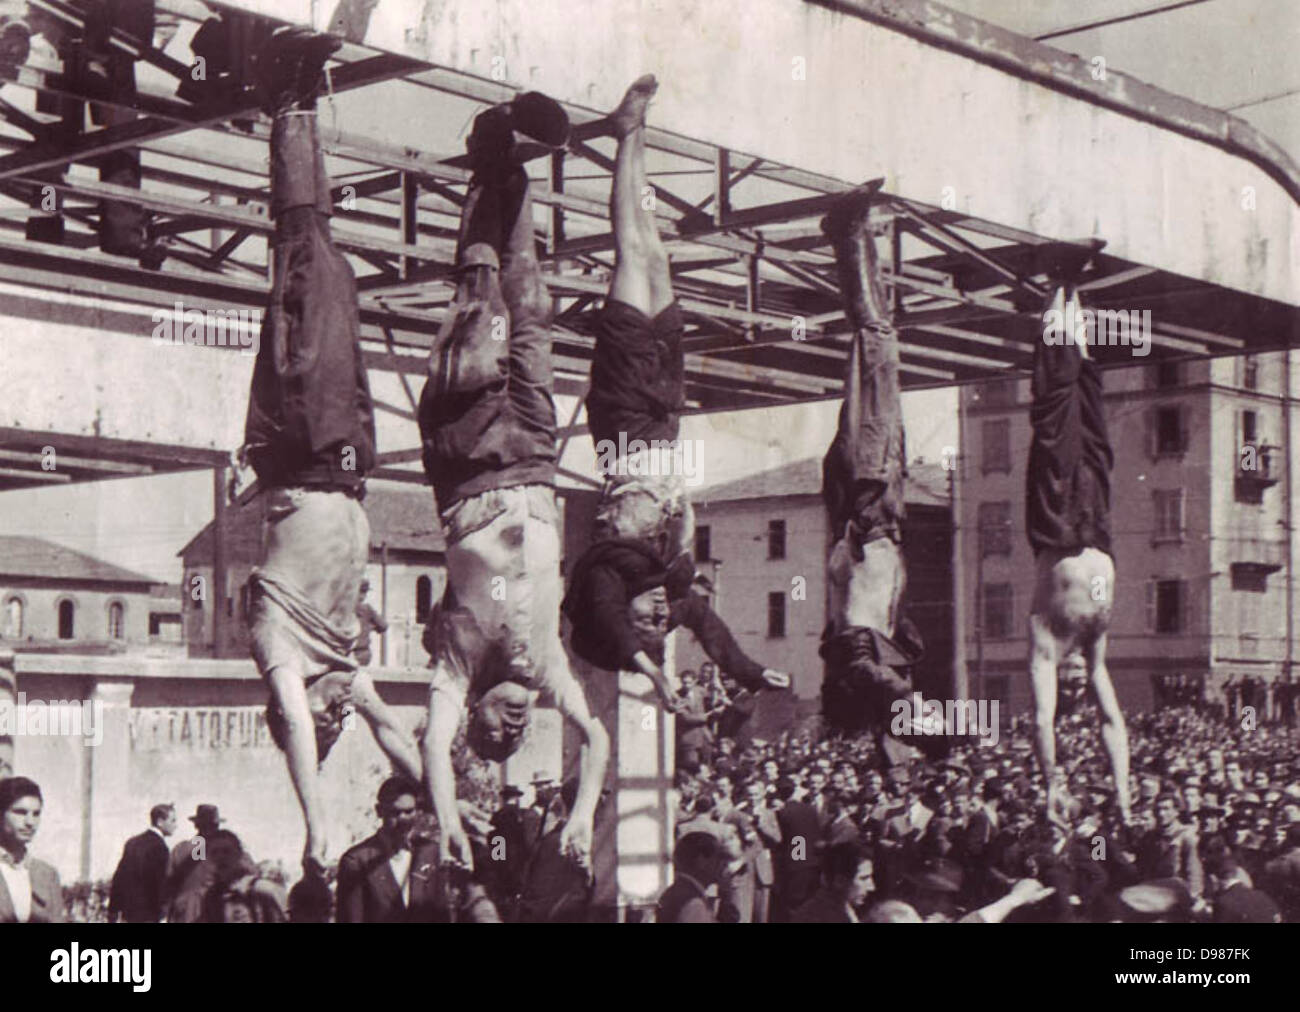 Benito Mussolini (1883-1945) and his mistress Clara Petacci hanging in a public square after their execution by Italian Communist partisans in April 1945. Stock Photo